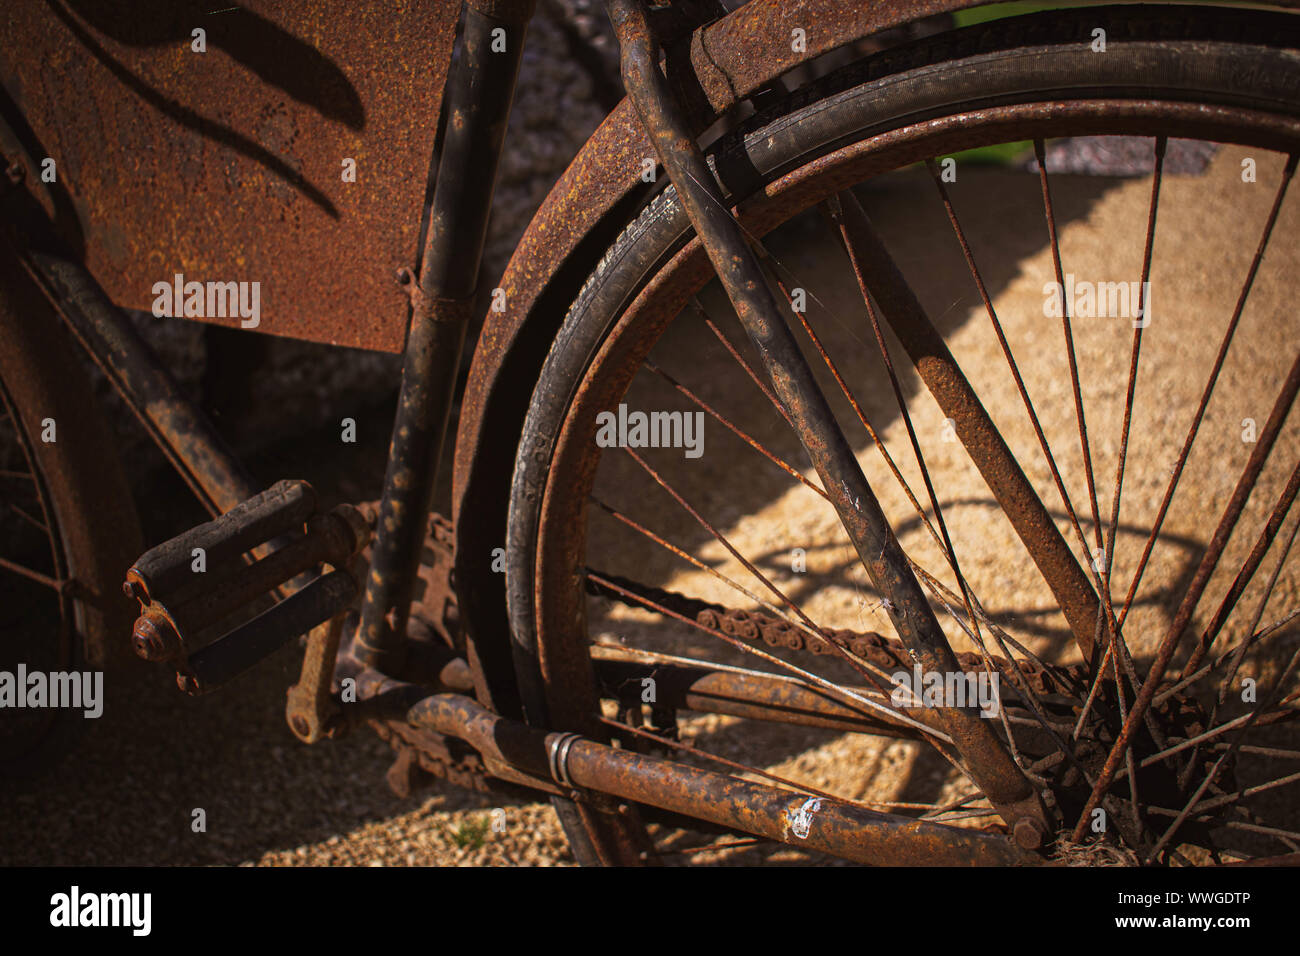 A close up of a rusted antique bike showing lots of age and patina Stock Photo